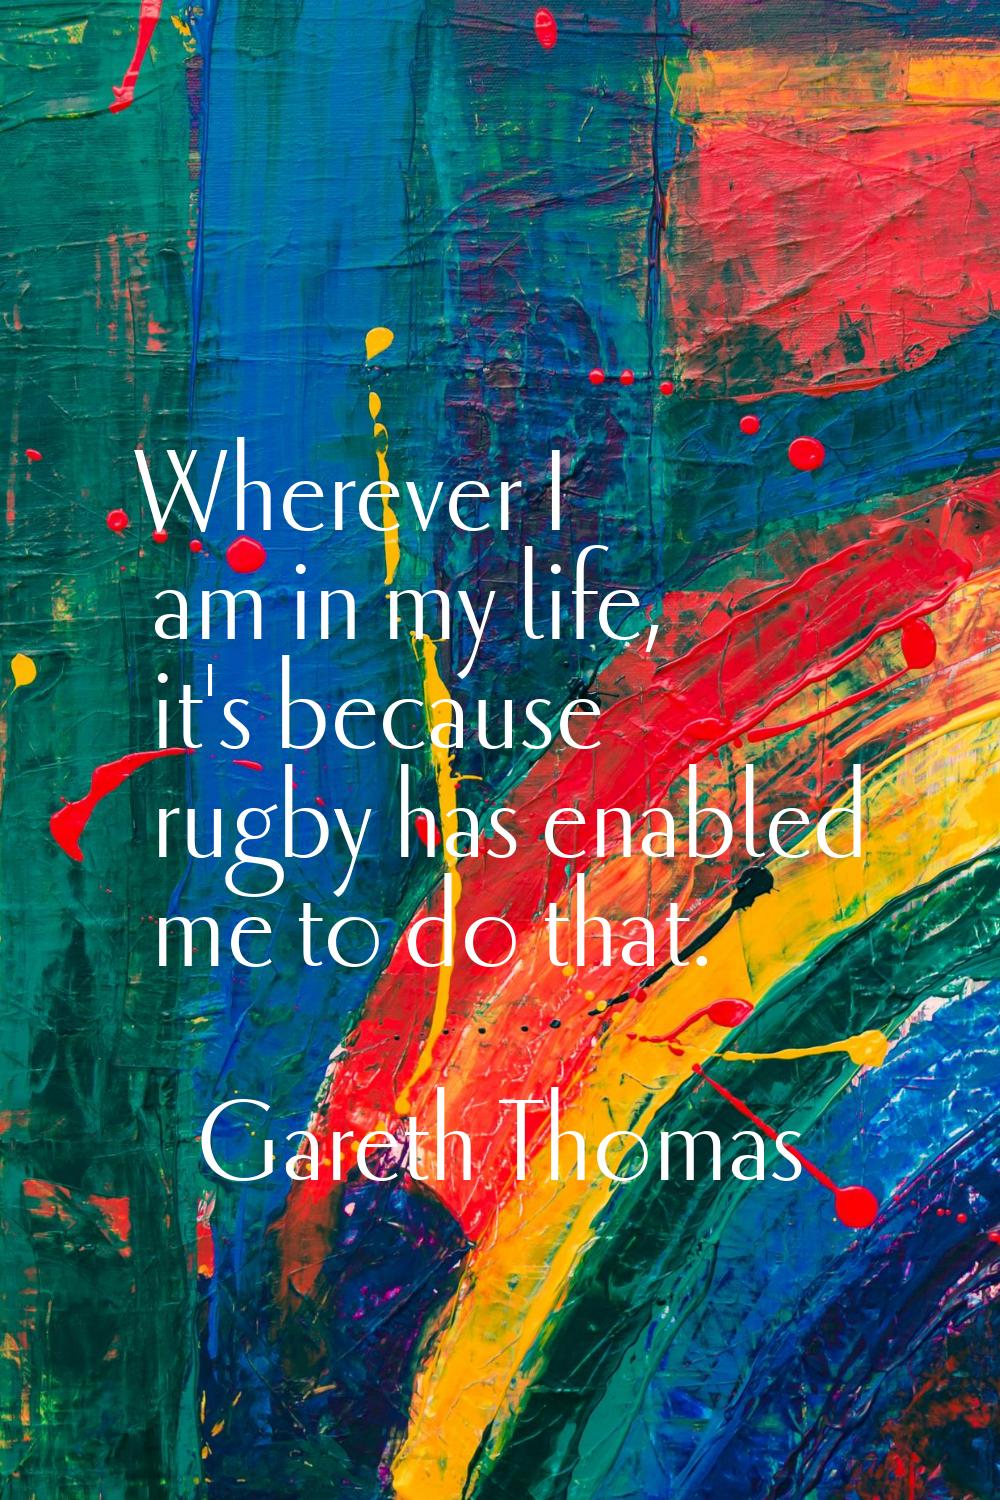 Wherever I am in my life, it's because rugby has enabled me to do that.